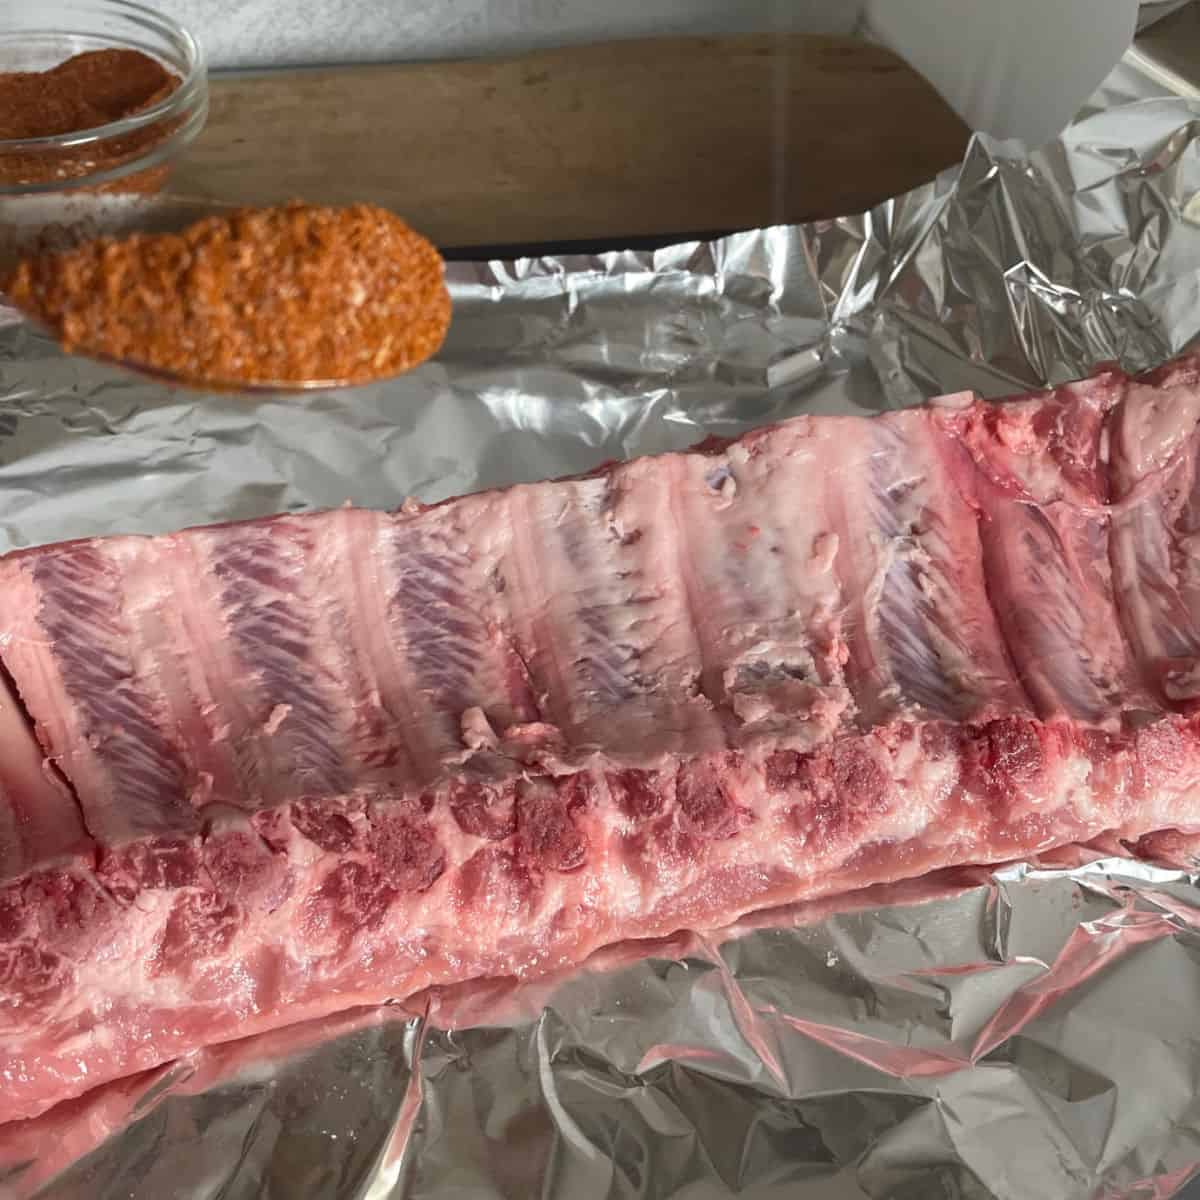 A rack of baby back ribs and a spoonful of seasoning mix on aluminum foil.